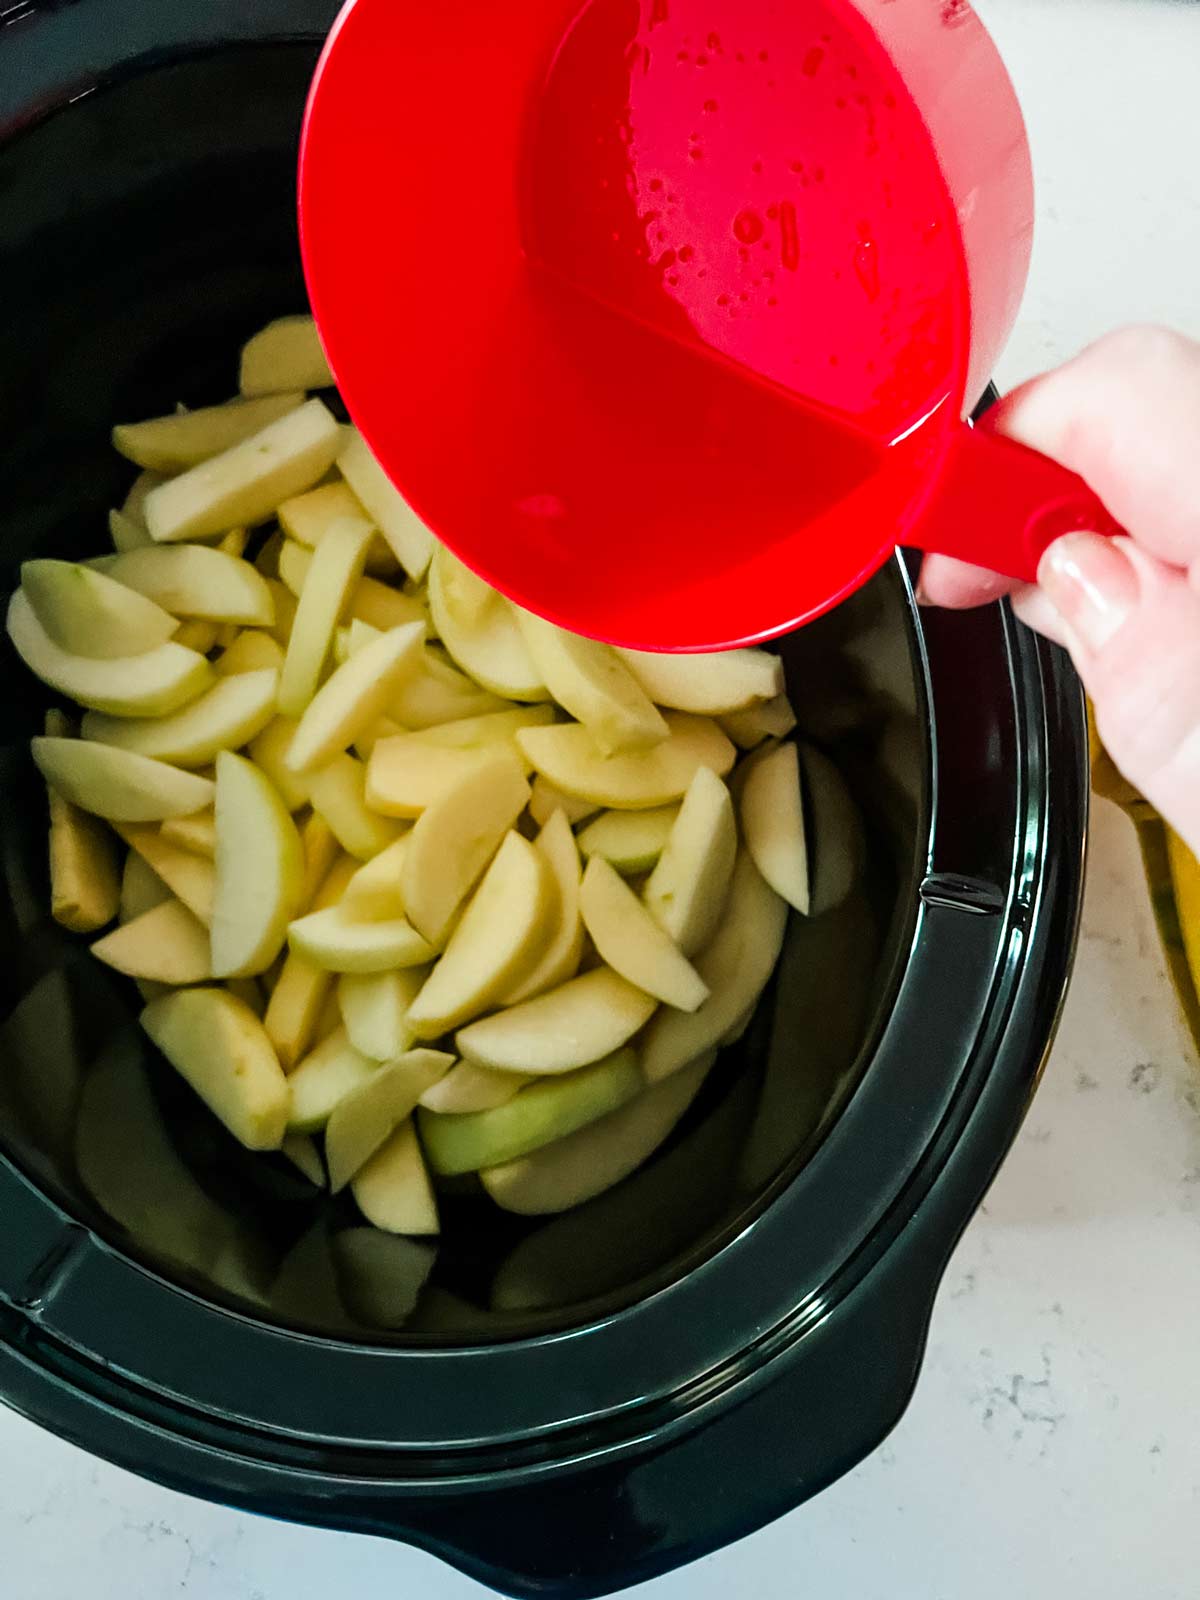 Lemon juice being poured on top of sliced apples in a slow cooker.